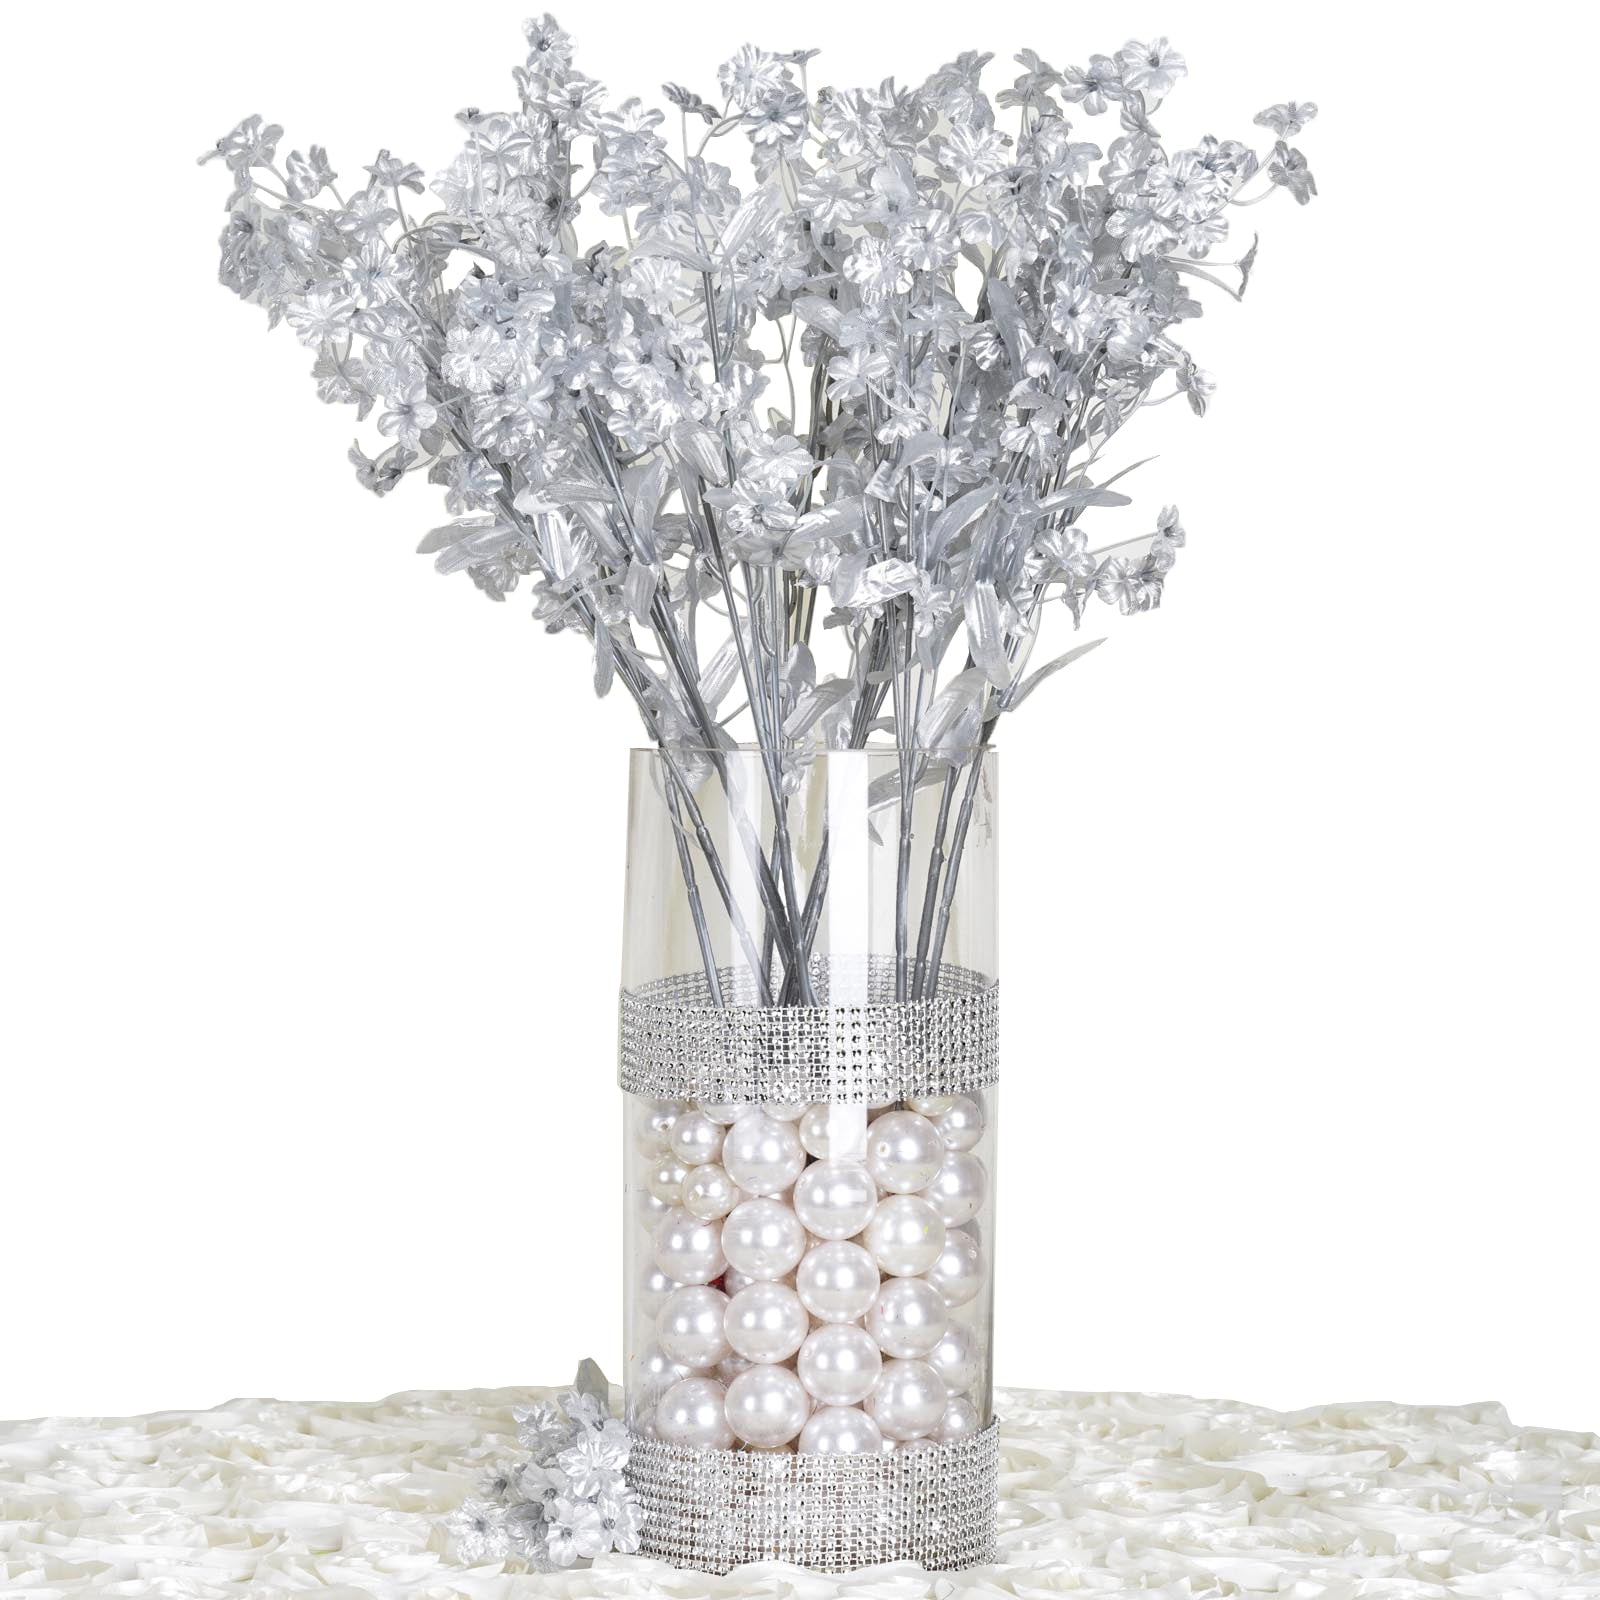 Spirit Up Art Baby Breath Flowers 13 Artificial Bulk White 27Pcs Long  Stems for Wreath Wedding DIY Home Garden Party Table Decoration (9 Bunches)